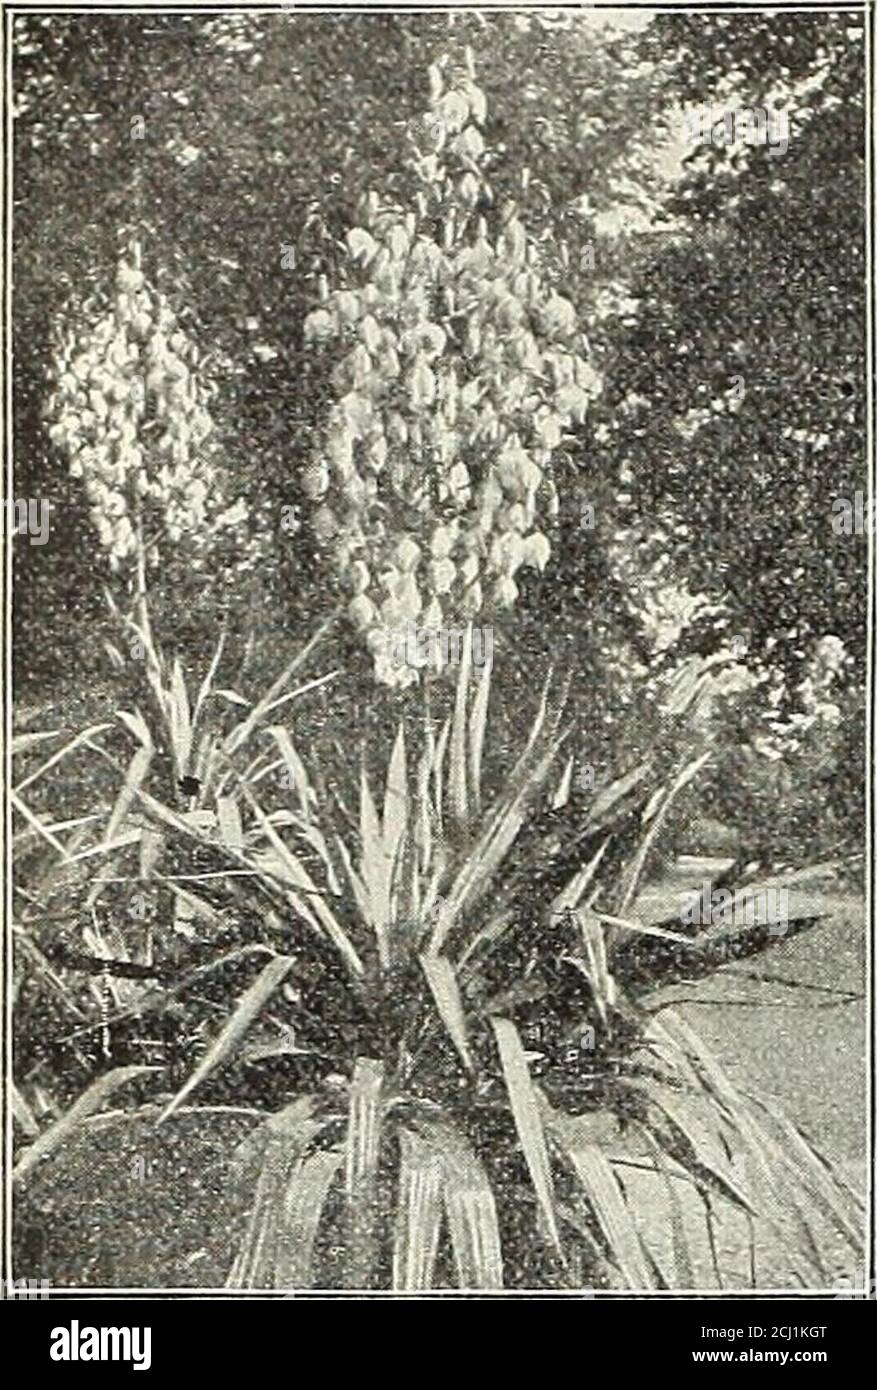 . Dreer's autumn 1904 catalogue . f native plant&gt; pure white flowers; spring.Trillium ( Wood Lily, or Wake Robin). Erectum. Purple Wood-Lily : very early. Grandiflorum. The handsome white Wake-Robin.Tradescantia (Spider-wort). Virginica. Succession of purple flowers all summer; 2 ft. Virginica Alba. White-flowered. Coerulea. Bright blue flowers.Trollius Europacus (Globe Flower). Flowers like a giant buttercup; all summer; 1 ft. Caucasicus, Orange Globe. Deep orange. 35 cts. each; $3.50 per doz.Tunica Saxifraga. Dwarf, tufted plant; bright pink. 25 cts. each ; $2.60 per doz.Valeriana Coccine Stock Photo